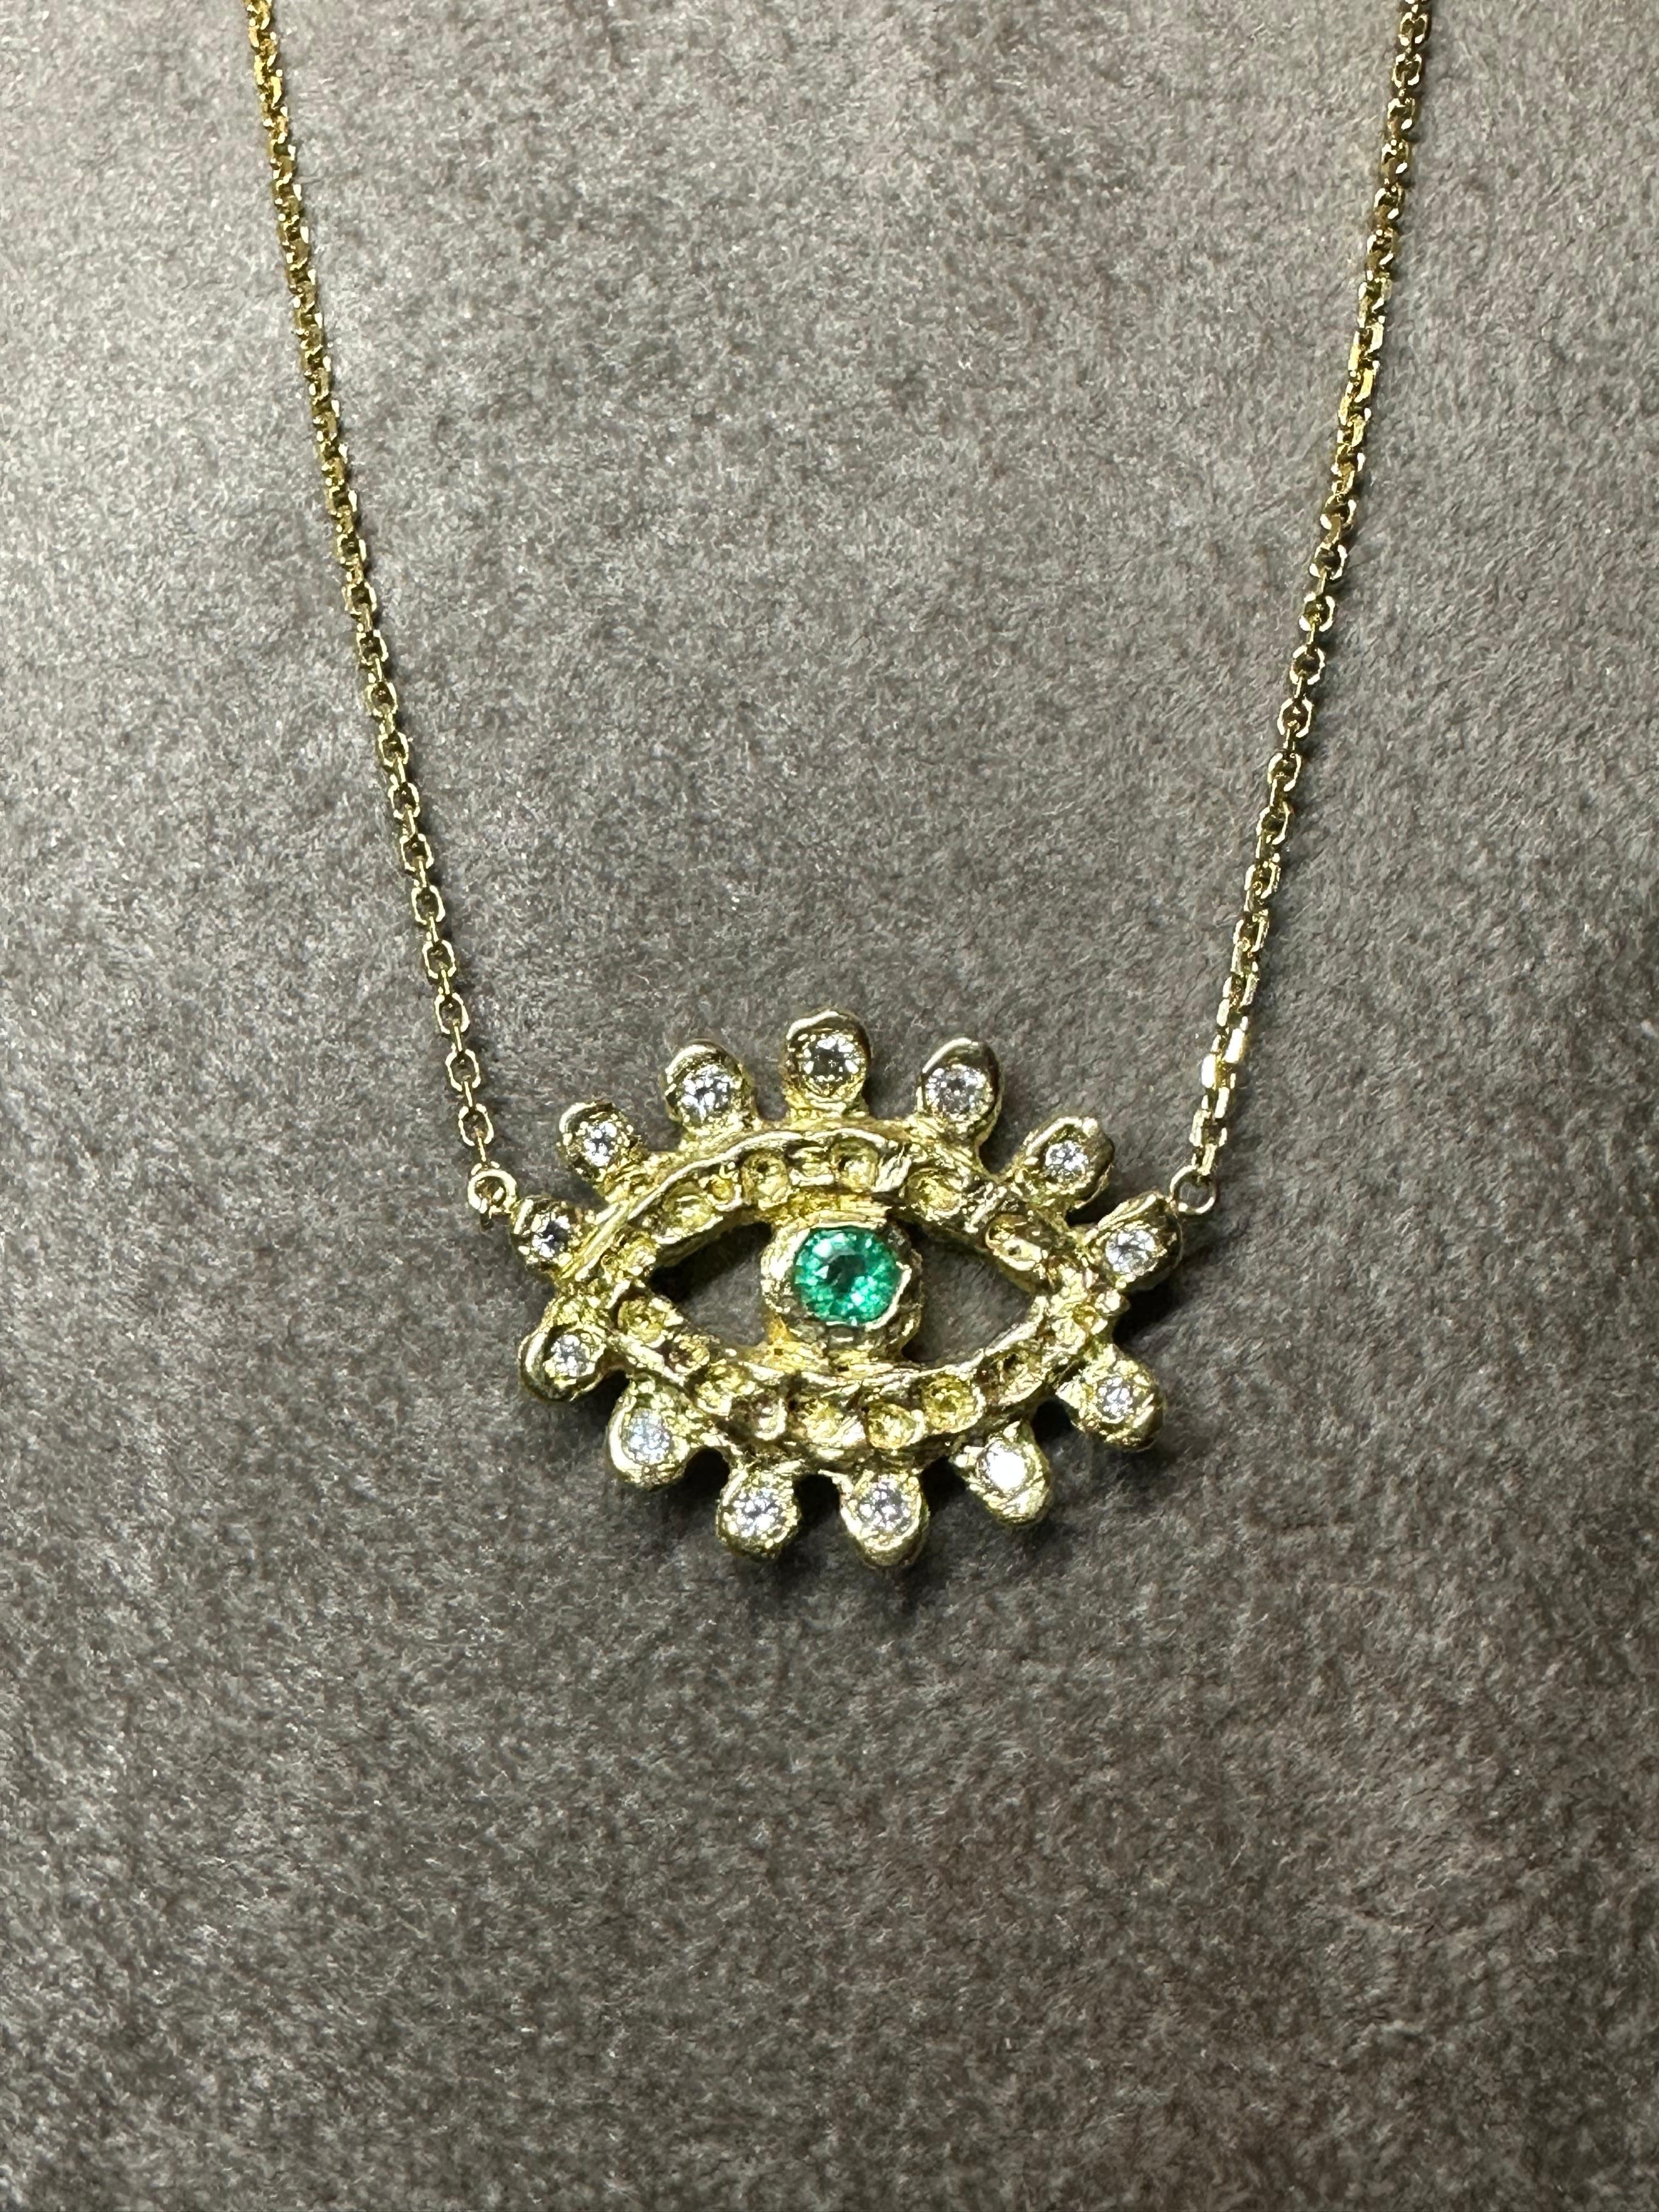 Women's Emerald Evil Eye Necklace with Diamonds in Gold in stock For Sale